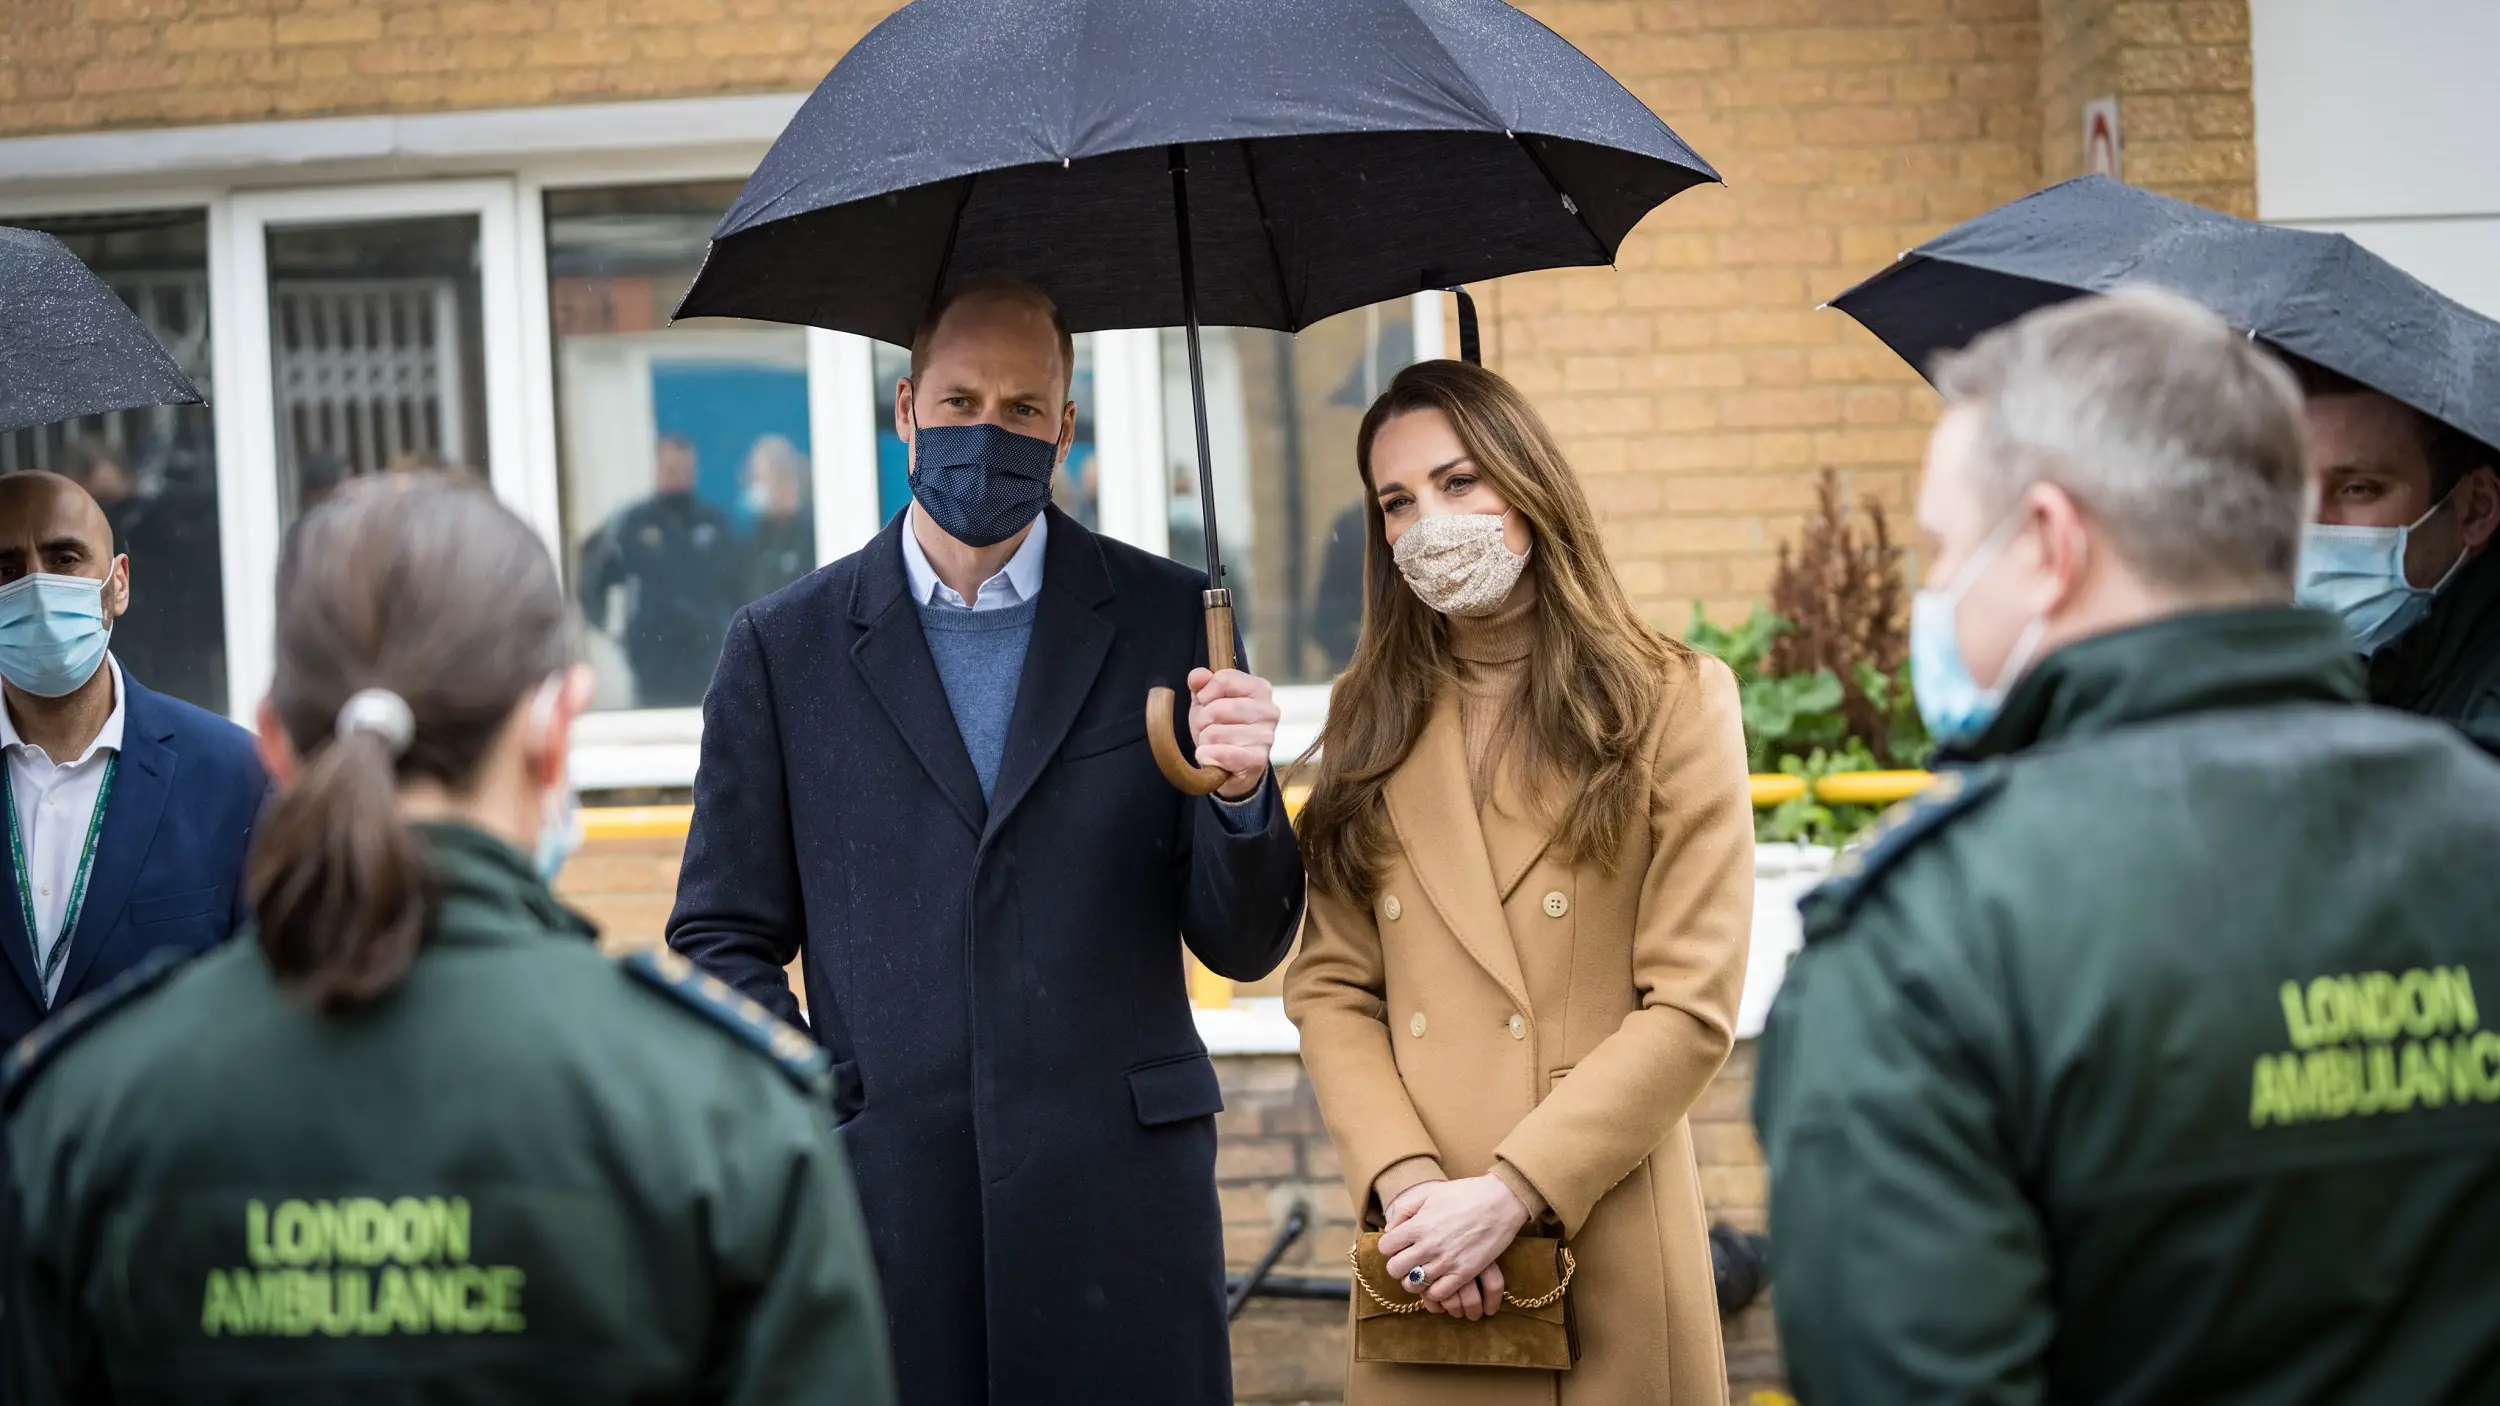 The Duke and Duchess of Cambridge visited Amublance Station in East London